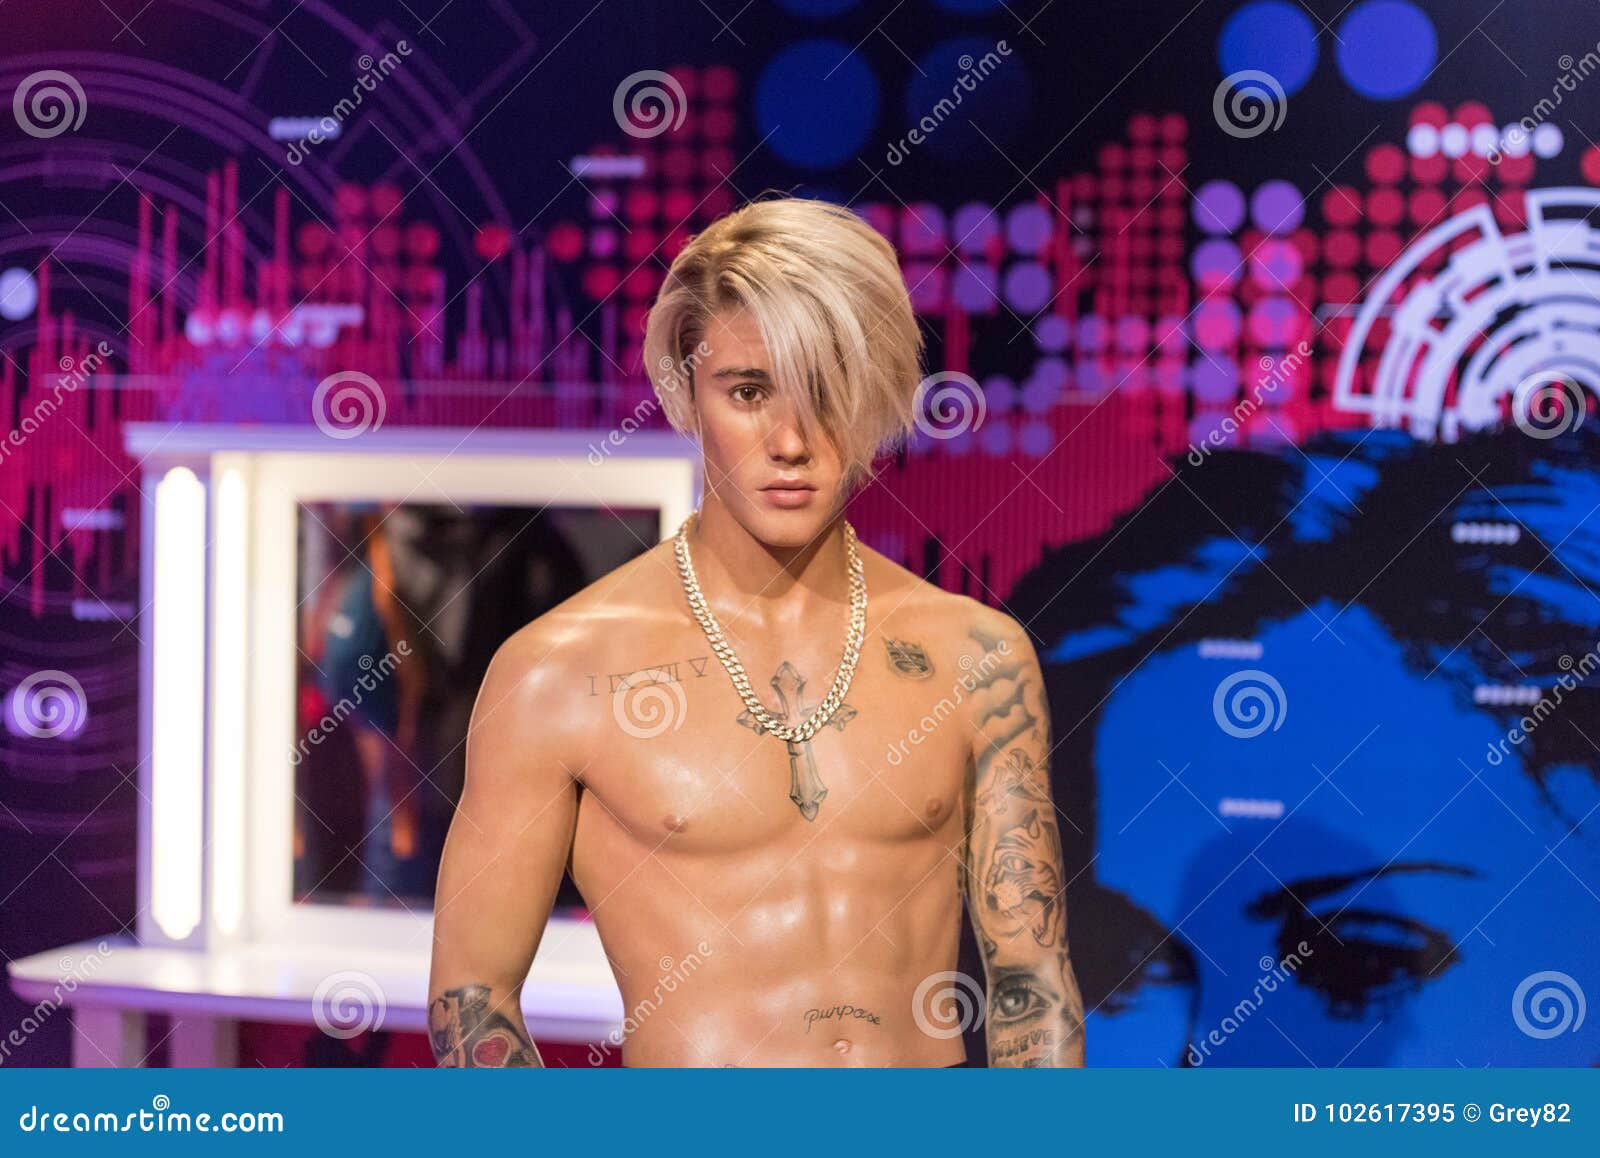 Justin Bieber Wax Figure at Madame Tussauds Museum in Istanbul ...